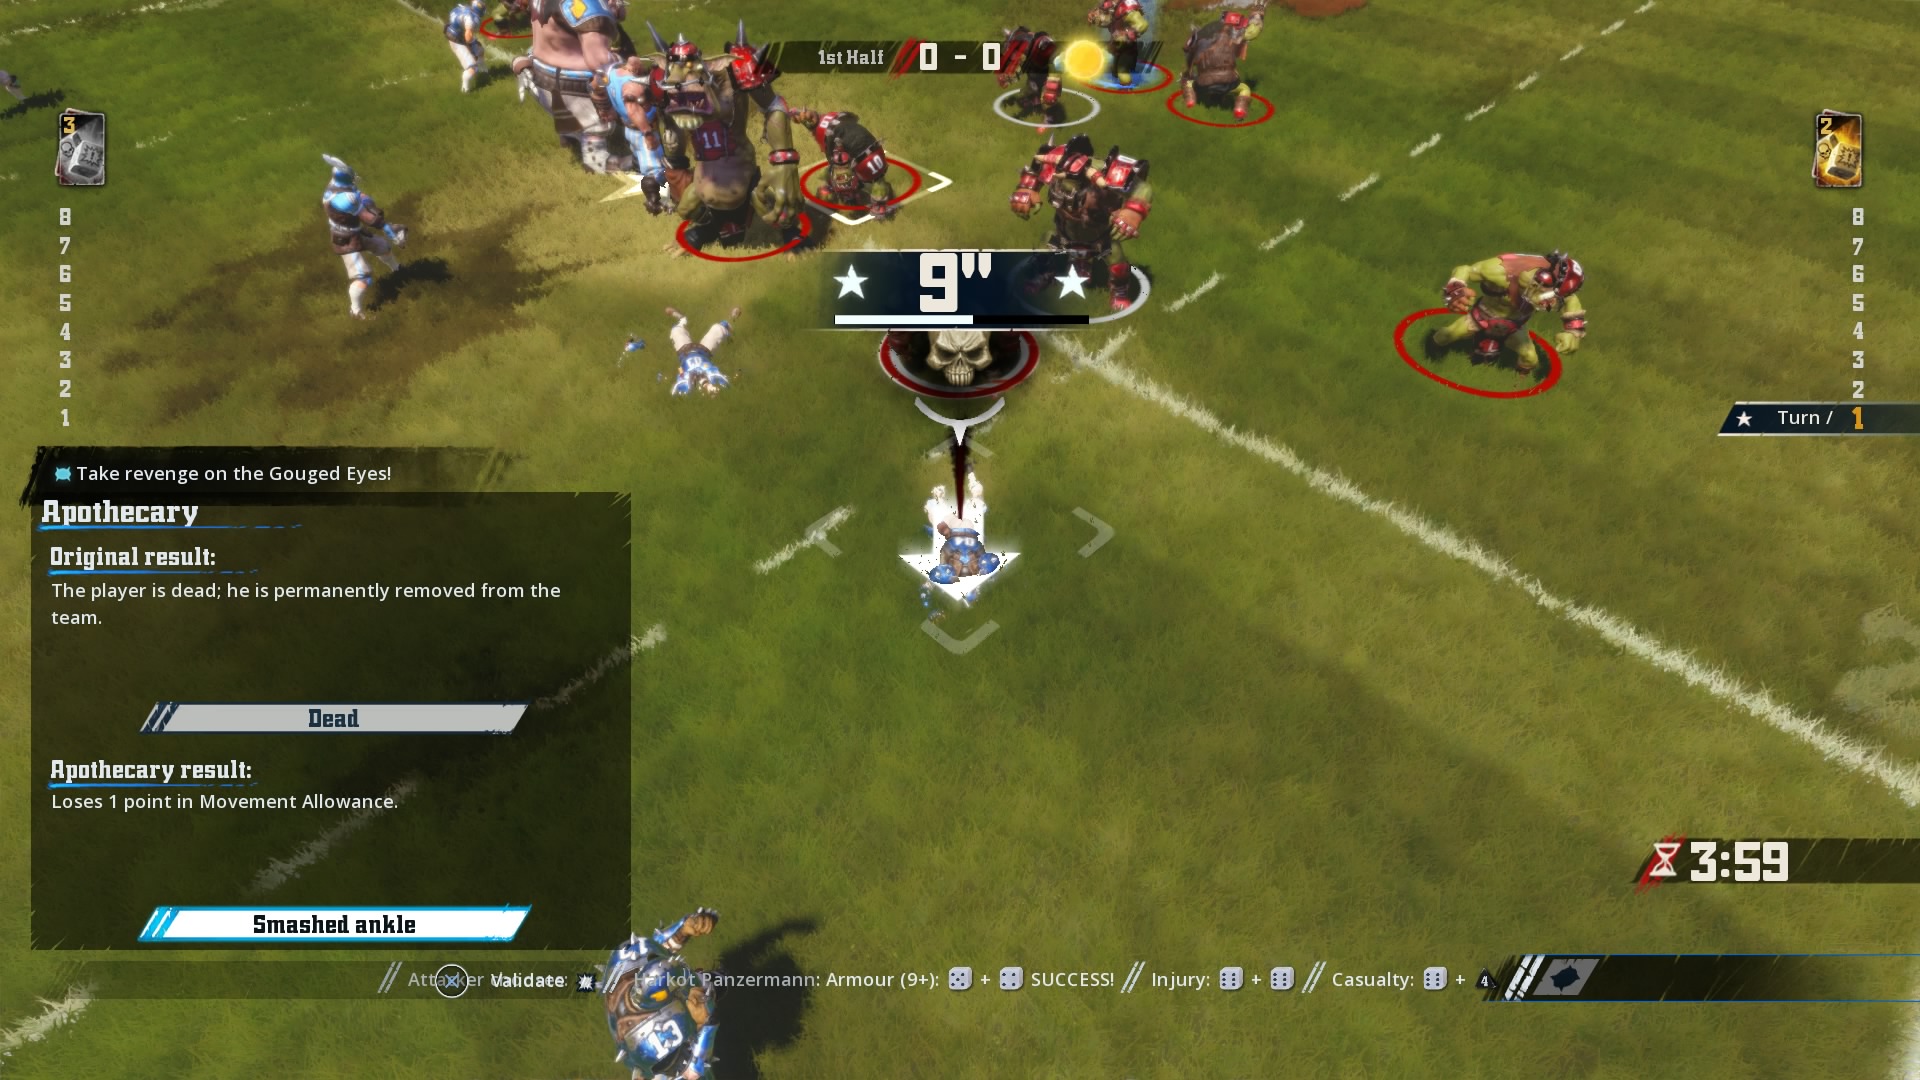 Blood Bowl 2 Review Gallery